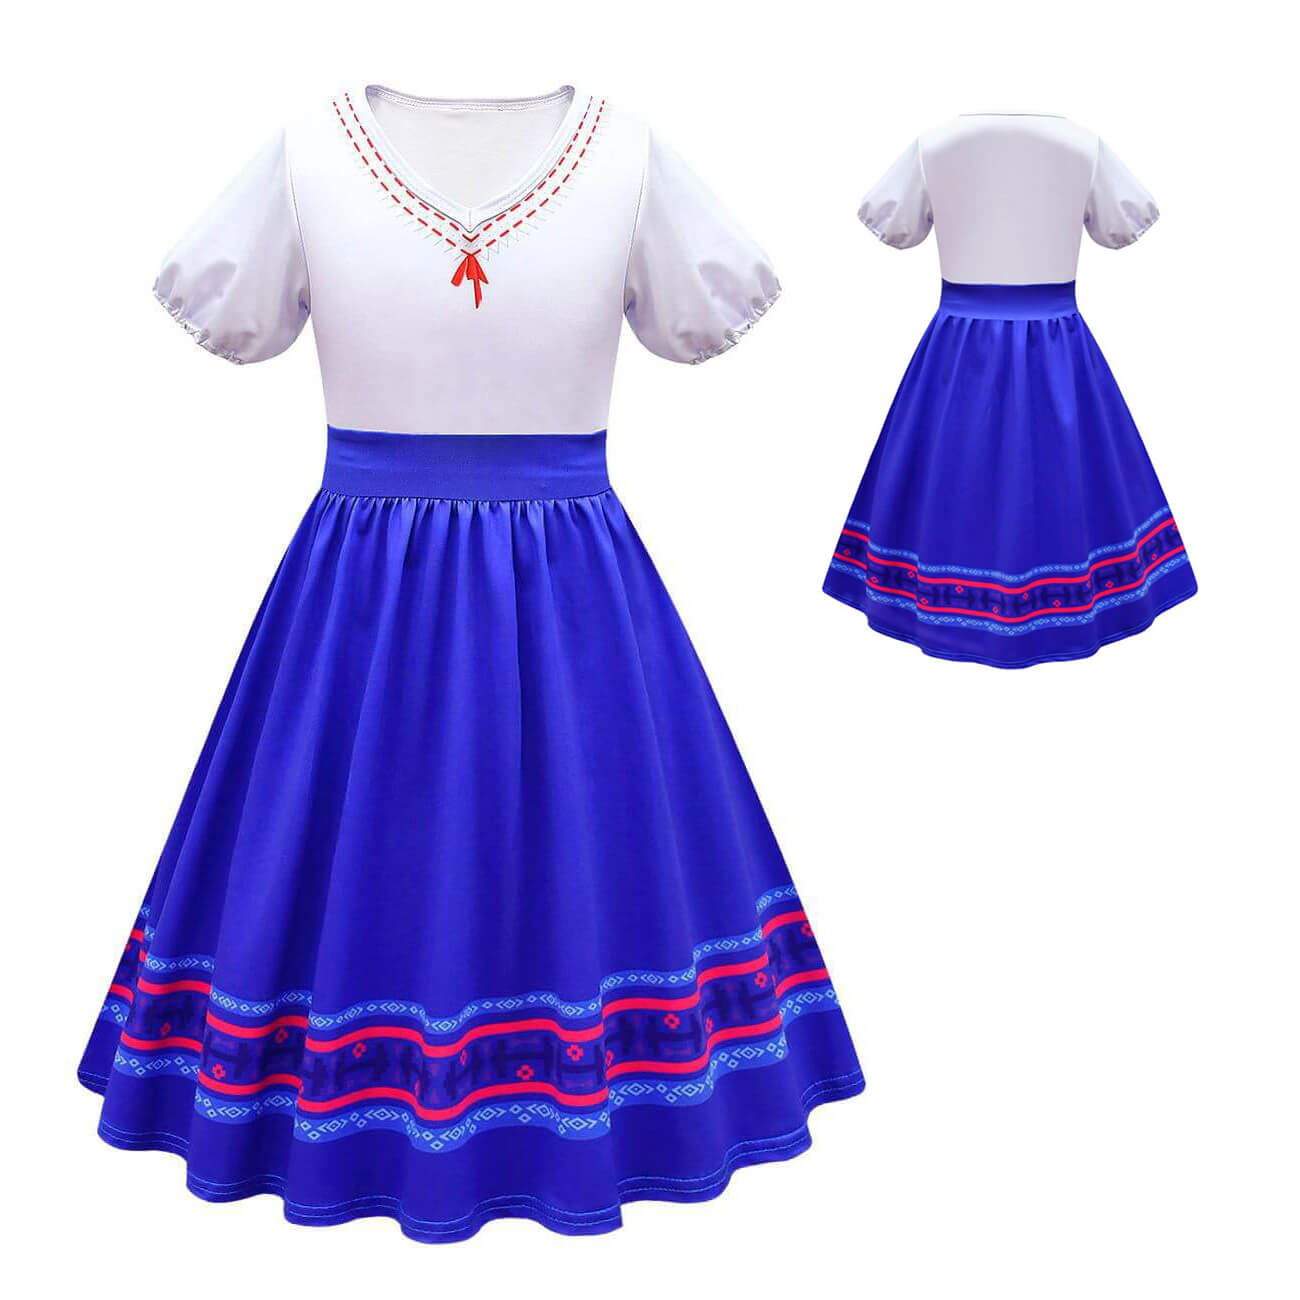 Magical Family Madrigal Dresses Adult Princess Cosplay Outfit Halloween Dress Up Costume